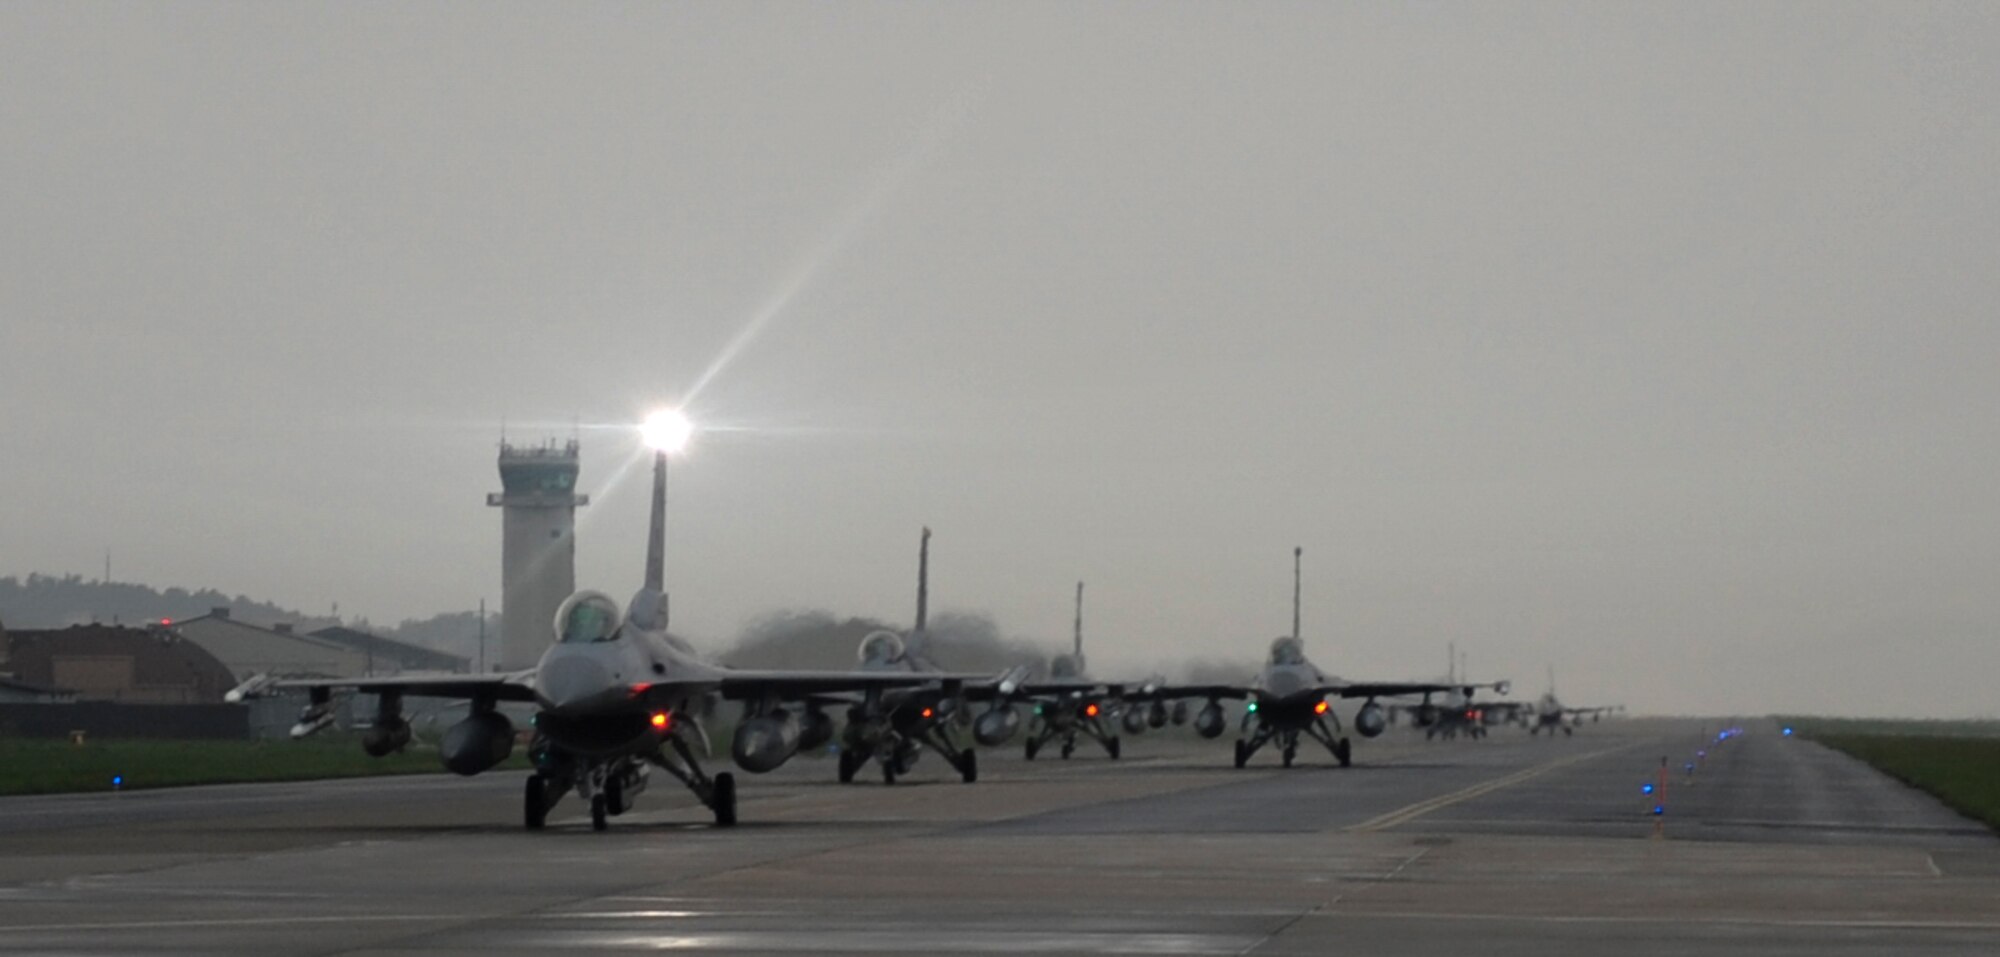 U.S. Air Force Fighting Falcon F-16s from the 8th Fighter Wing line up for an elephant walk at Kunsan Air Base, Republic of Korea, Aug. 22, 2017. The F-16 is a multi-role fighter aircraft, capable of close air support for ground forces and dominating enemy air assets in air-to-air combat. The elephant walk was a part of the regularly-scheduled operational readiness exercise, Beverly Pack 17-3, which tested the base’s ability to respond to various scenarios in a contingency environment. (U.S Air Force photo by Senior Airman Colville McFee/Released)